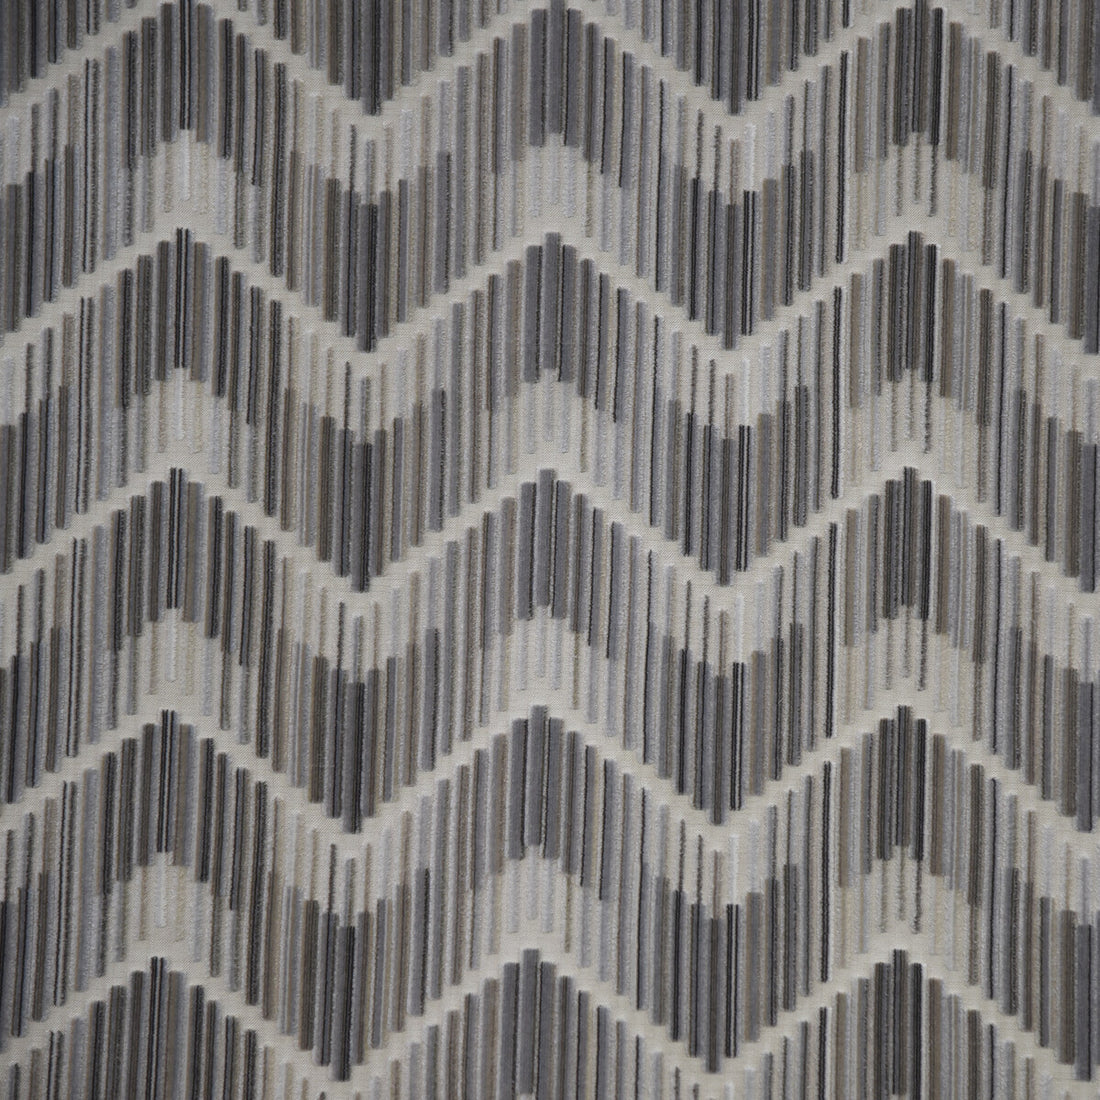 Kravet Couture fabric in 36617-1611 color - pattern 36617.1611.0 - by Kravet Couture in the Mabley Handler collection